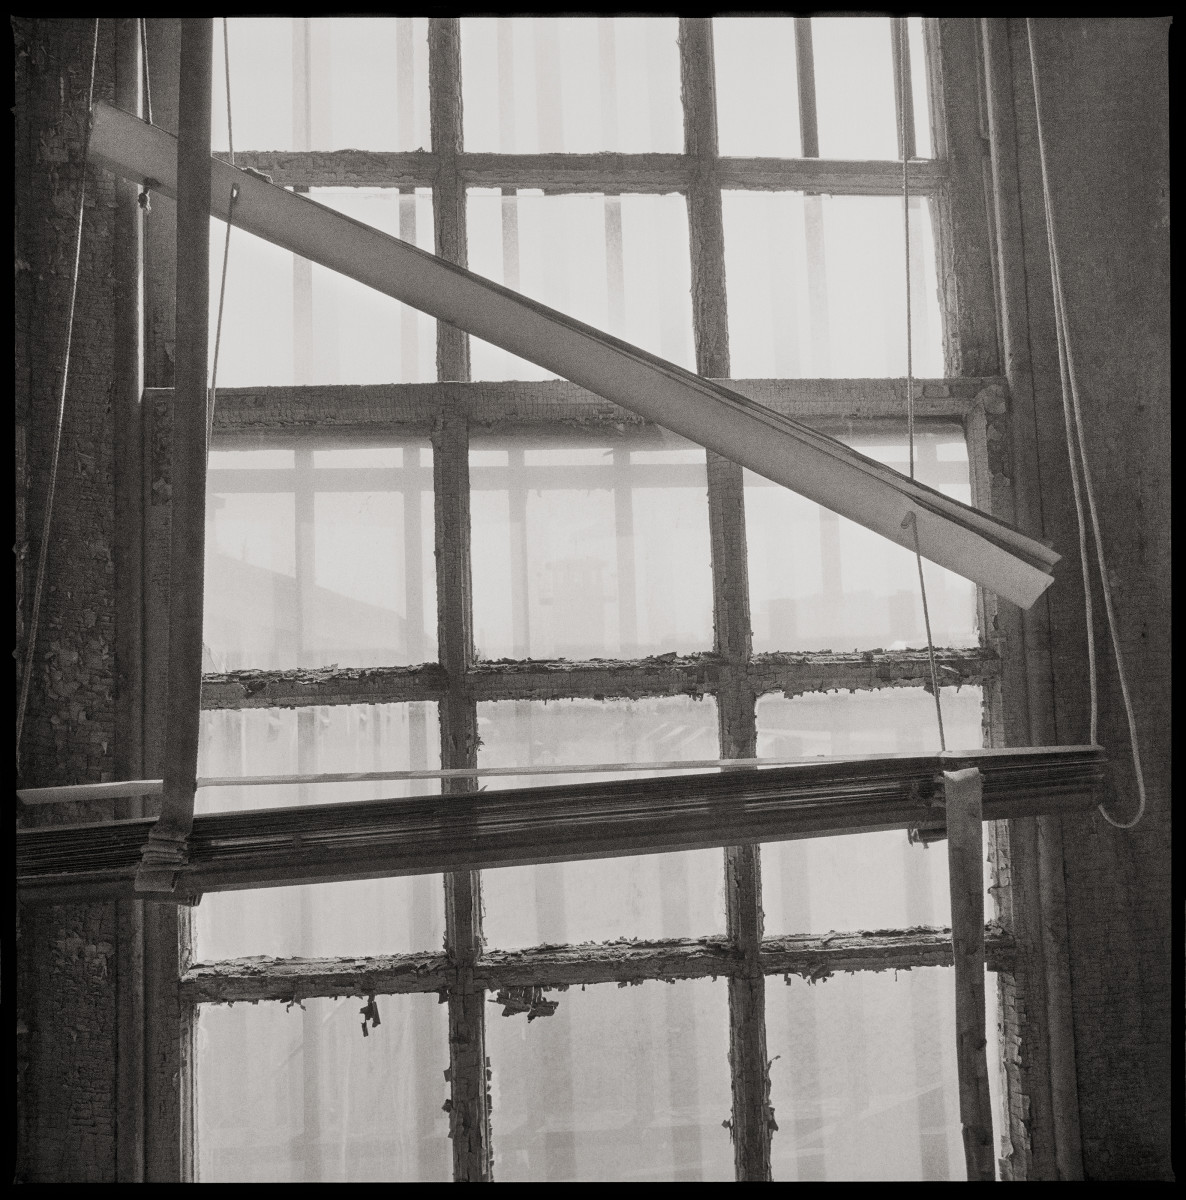 Death Row by Eric T. Kunsman  Image: ID: A black and white image shows a window with a broken shade in front of it.  The window has square pains of glass separated by wood. 